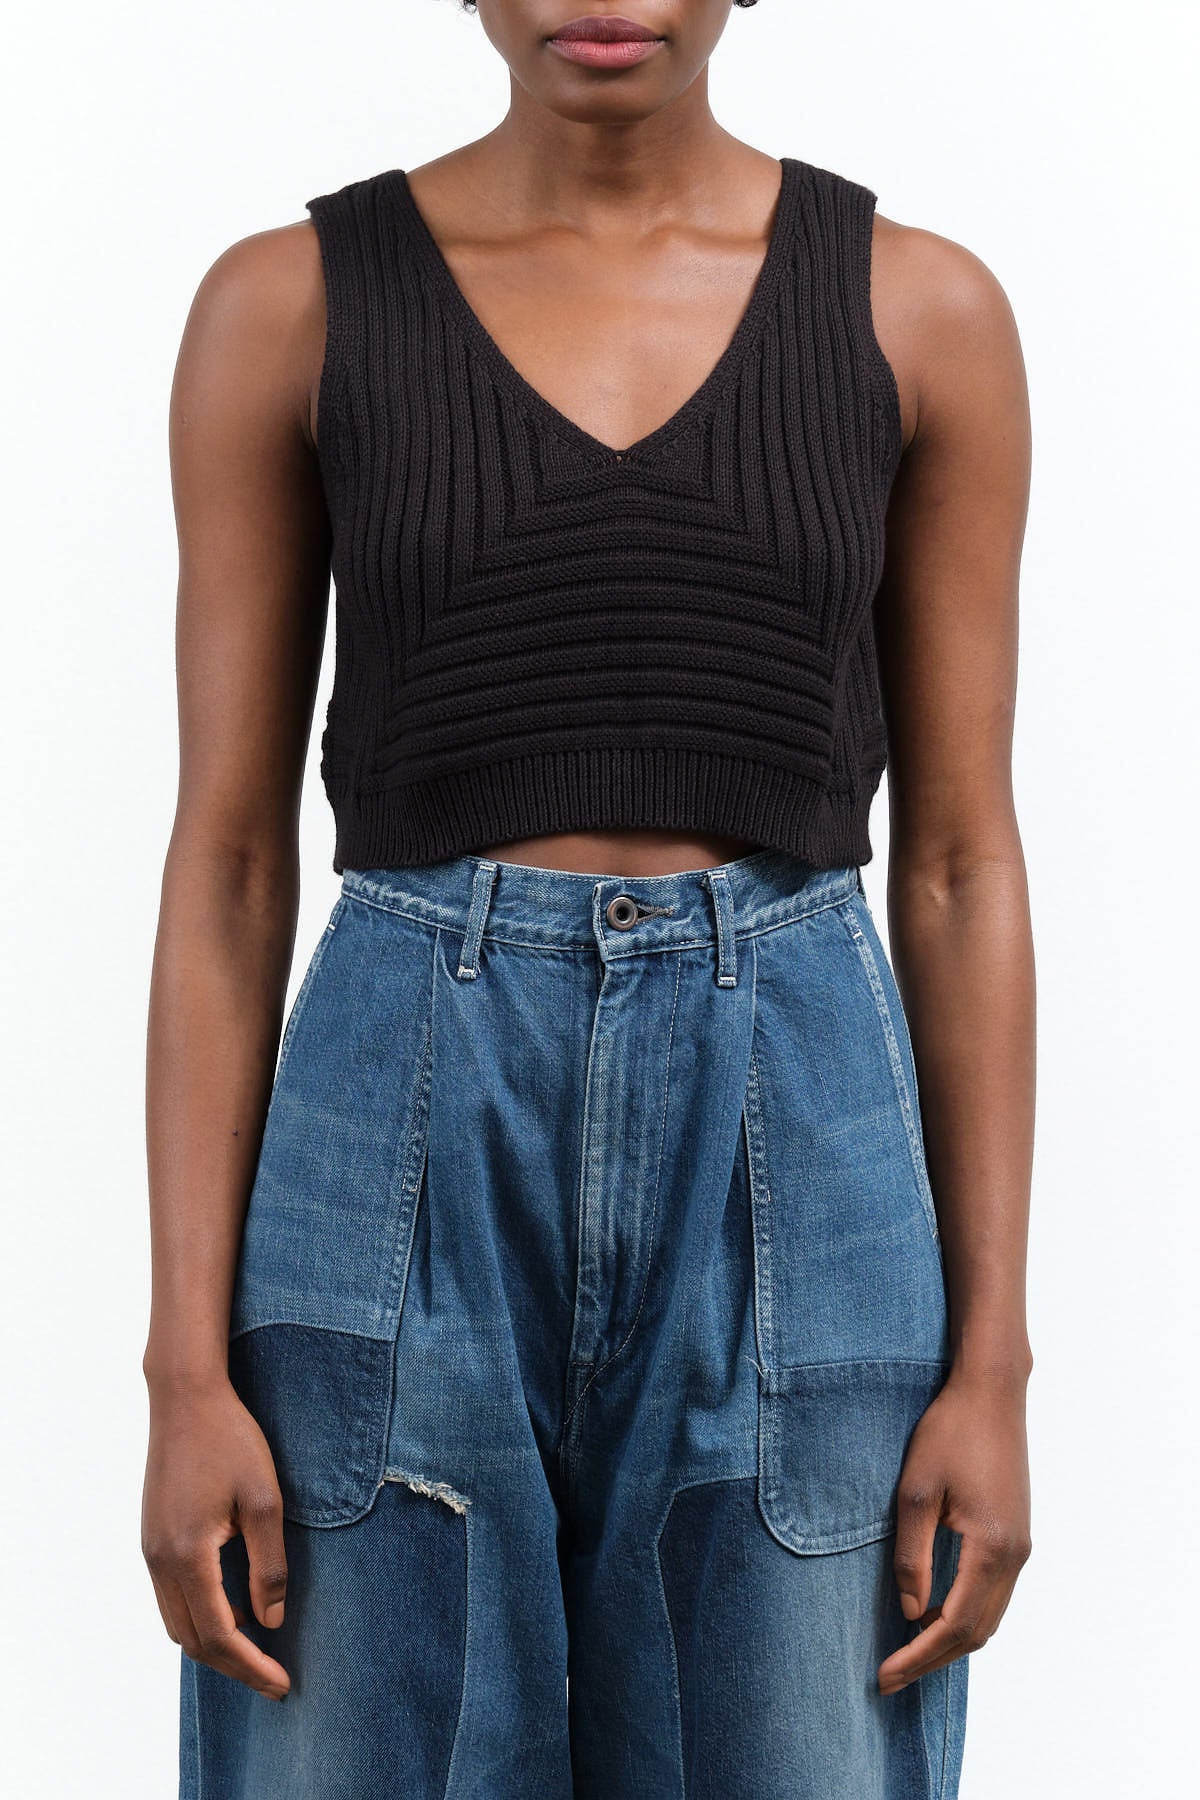 Cropped Rib Top by Atelier Delphine in Black